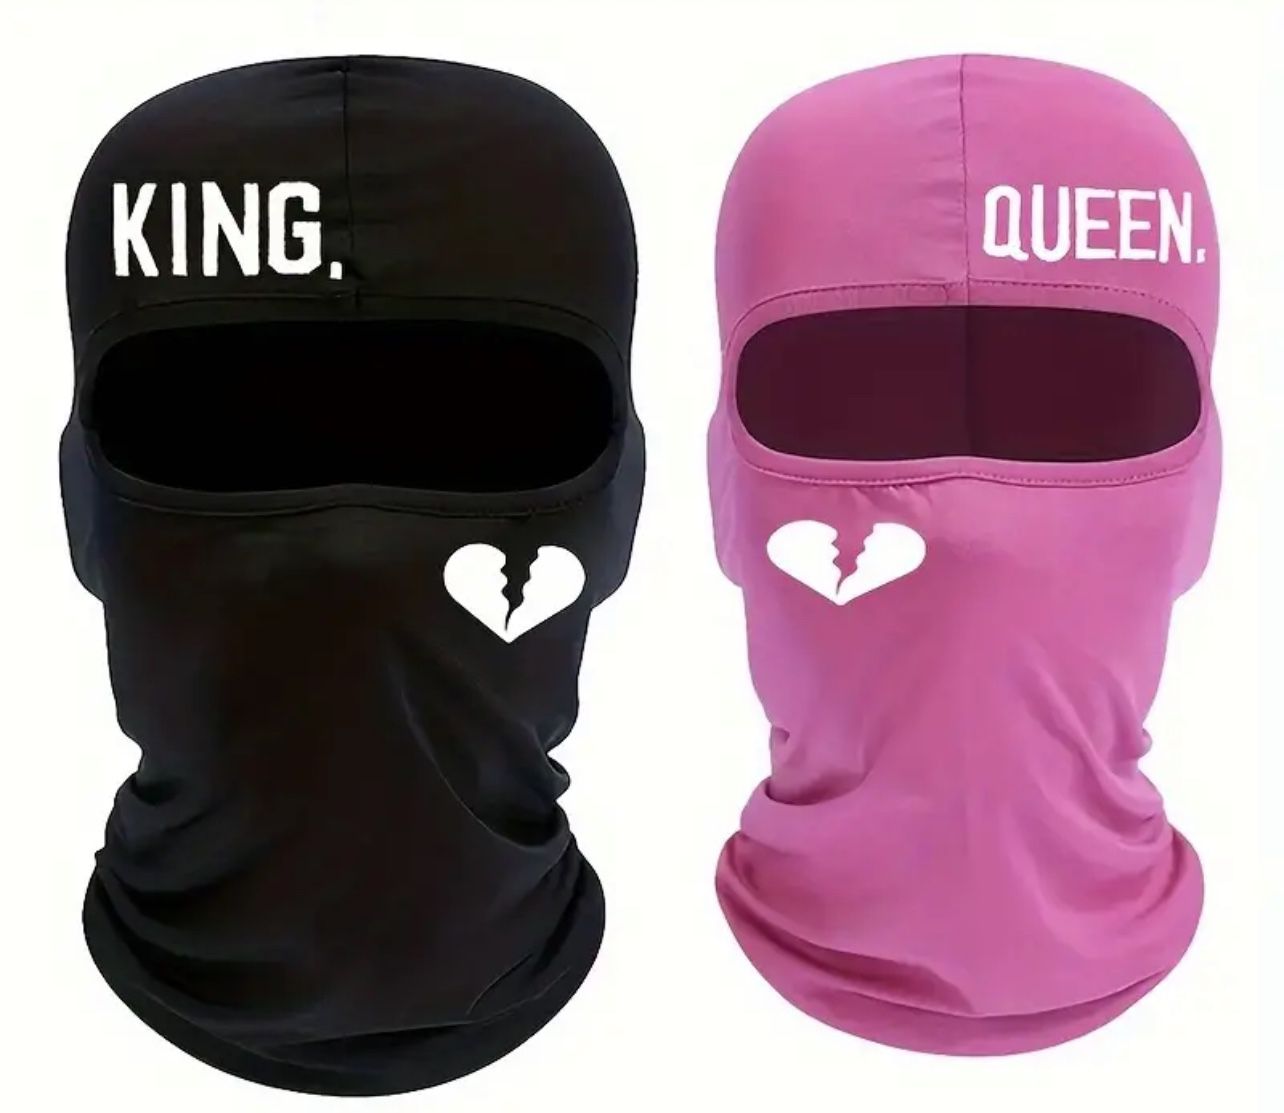 King + Queen Face Mask 